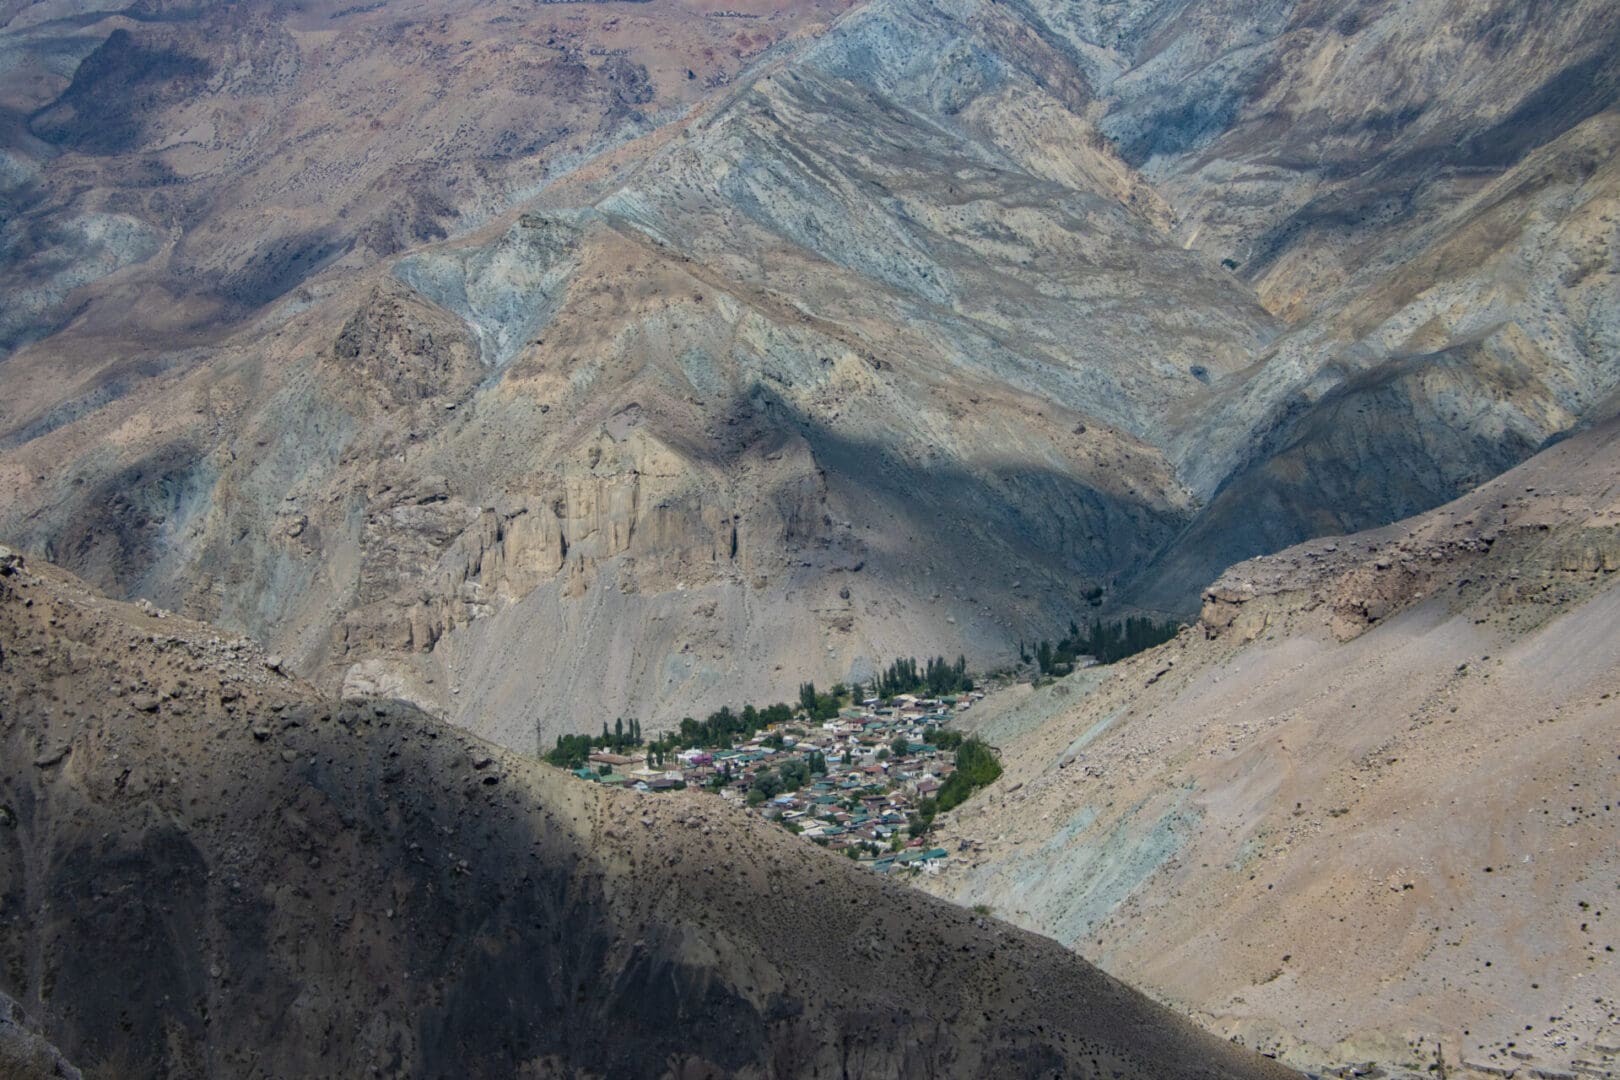 An aerial view of a village in the mountains.